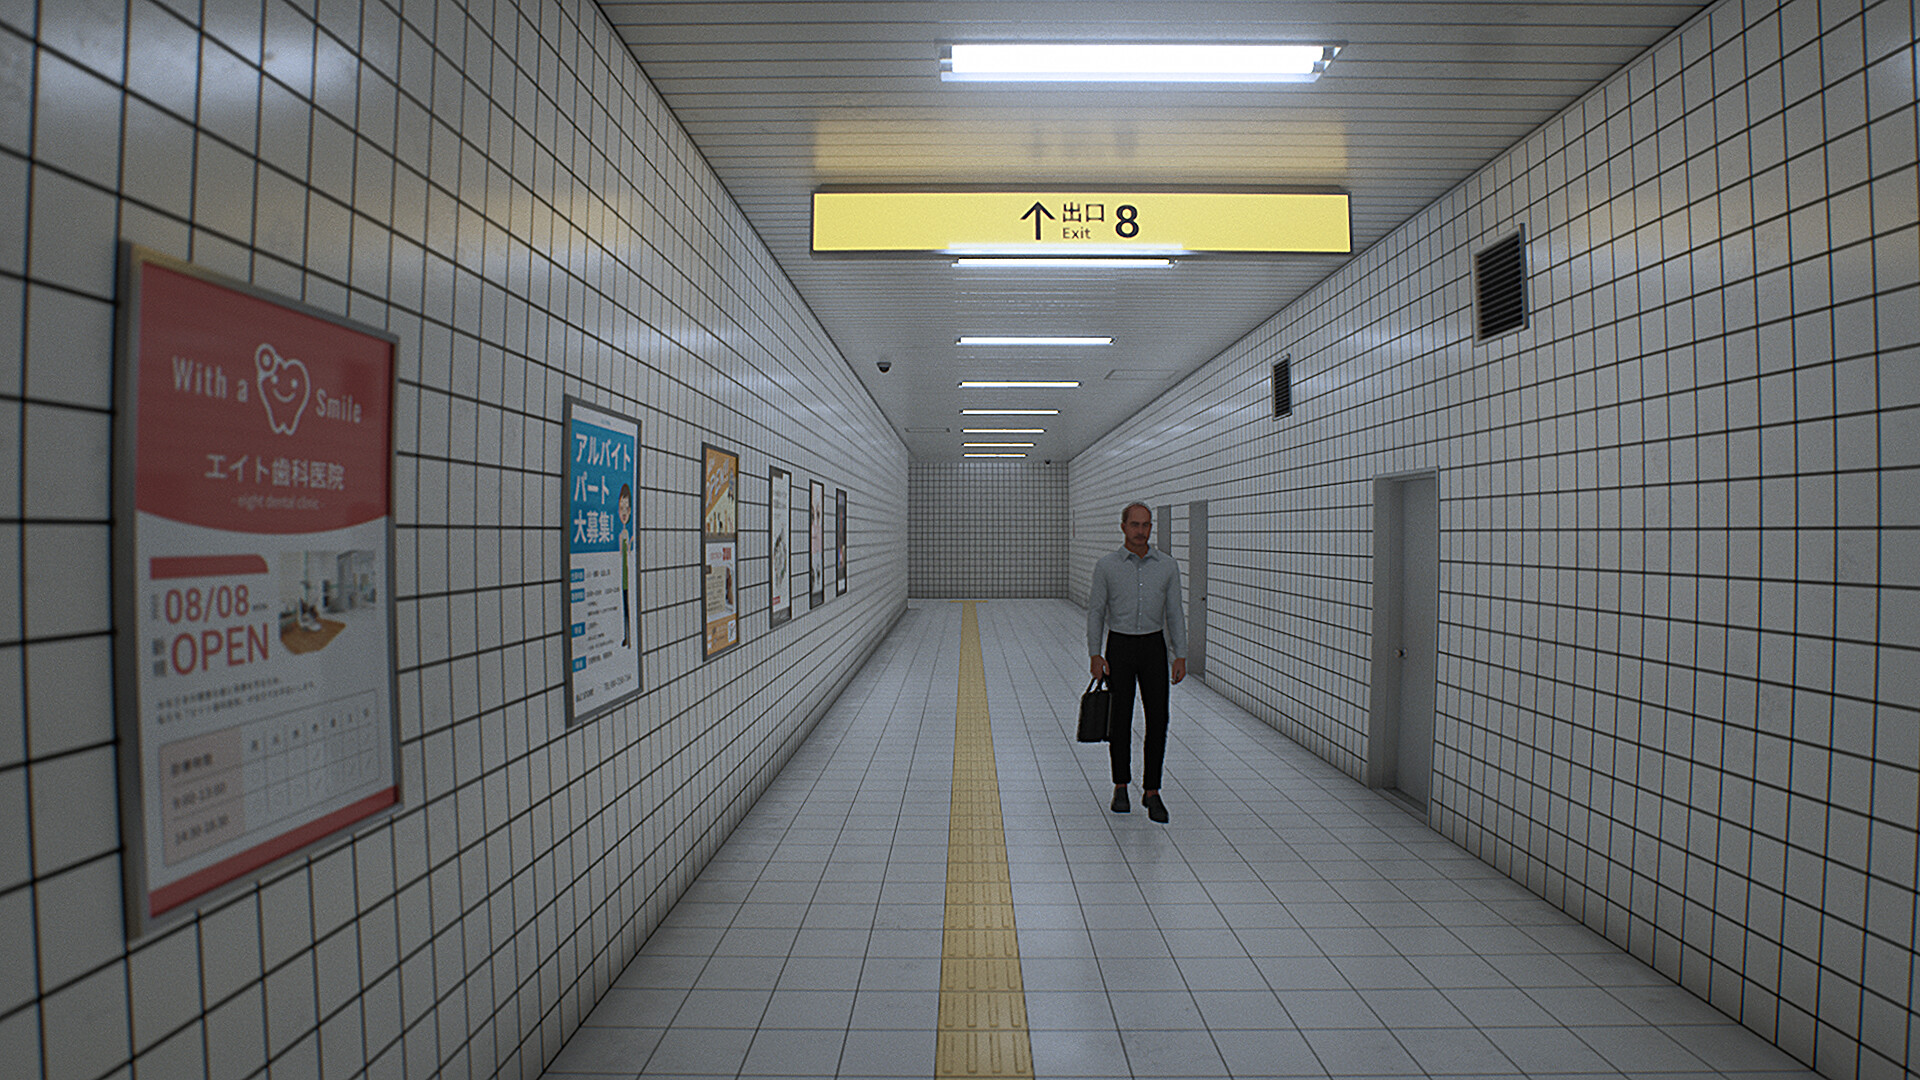 The Exit 8 in-game screenshot